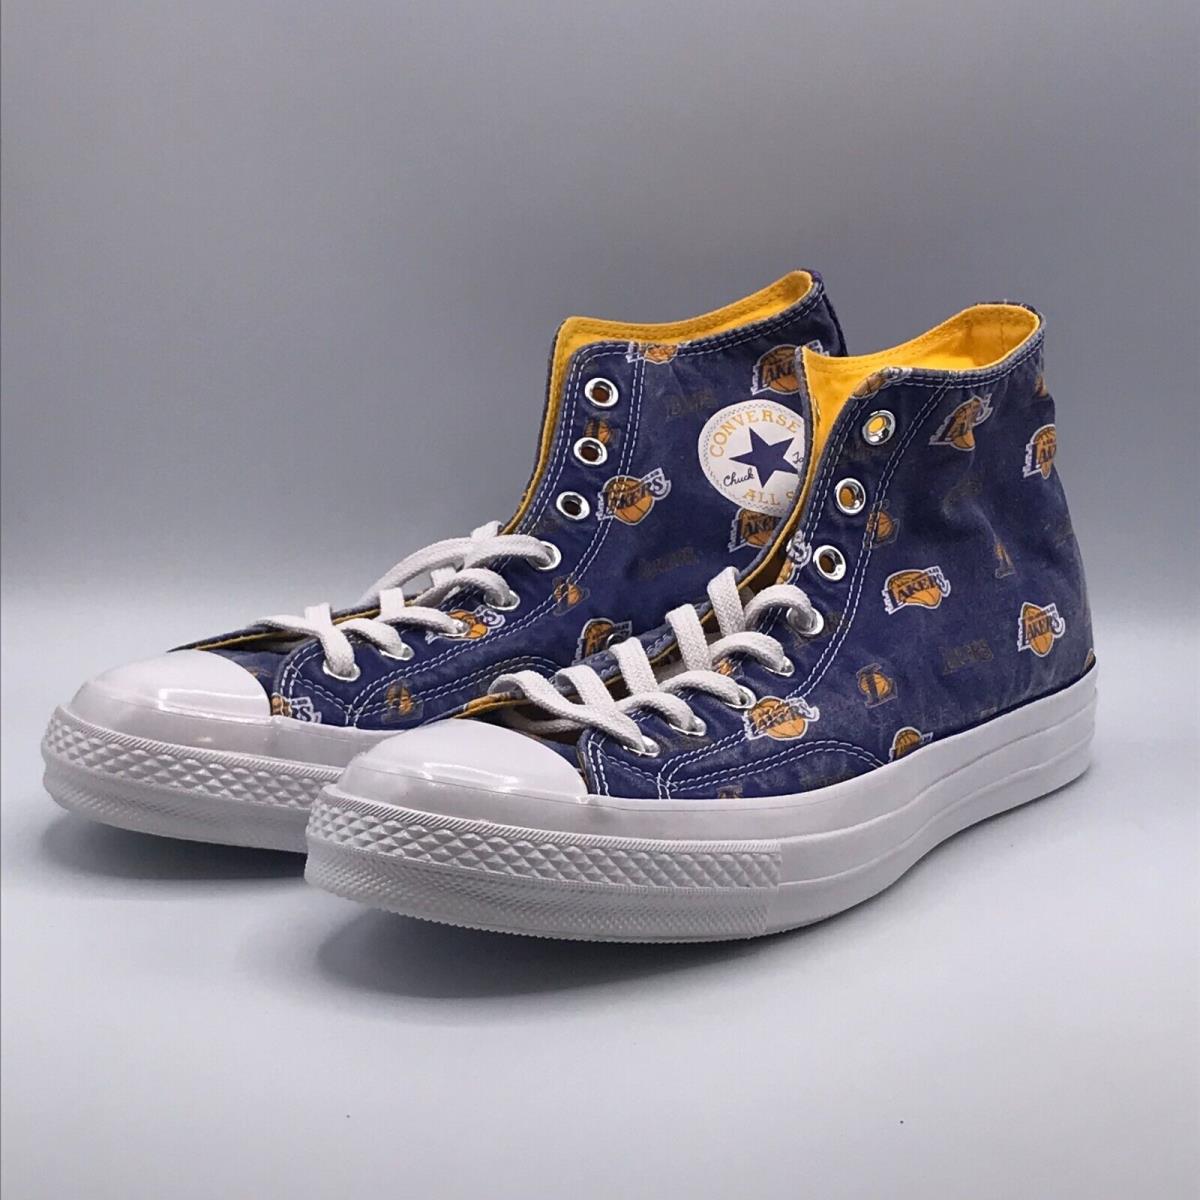 Converse Shoes Mens 10 Purple Yellow White CT All Star 70 Hi Lakers Sneakers